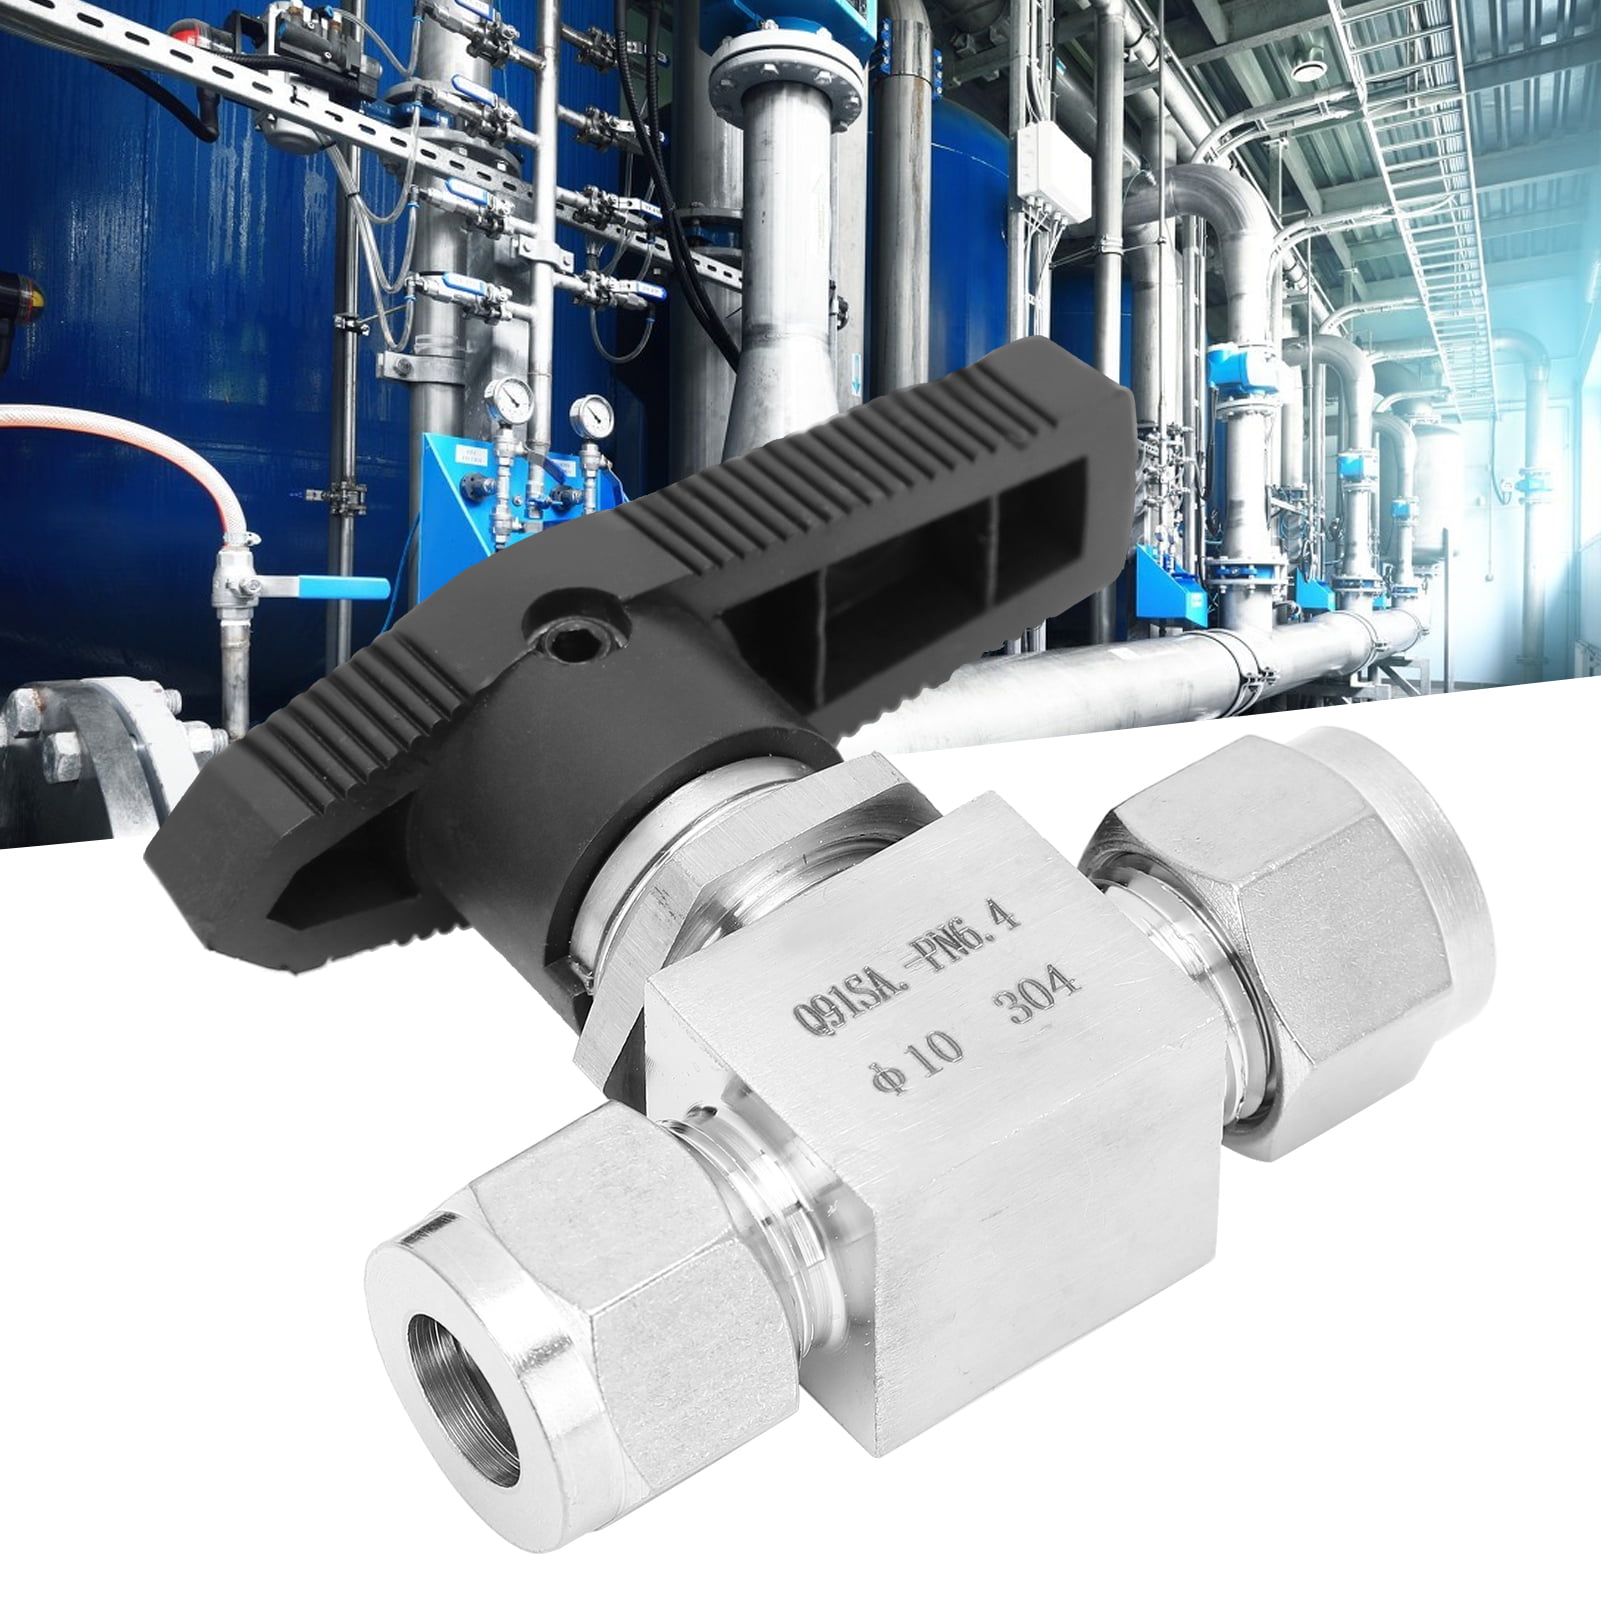 Smooth Delicate Tightness SS‑44S6 Needle Valve 304 Stainless Steel Valve Ф8 930Psi for Automobile And Shipbuilding Industry Water Gas Oil 